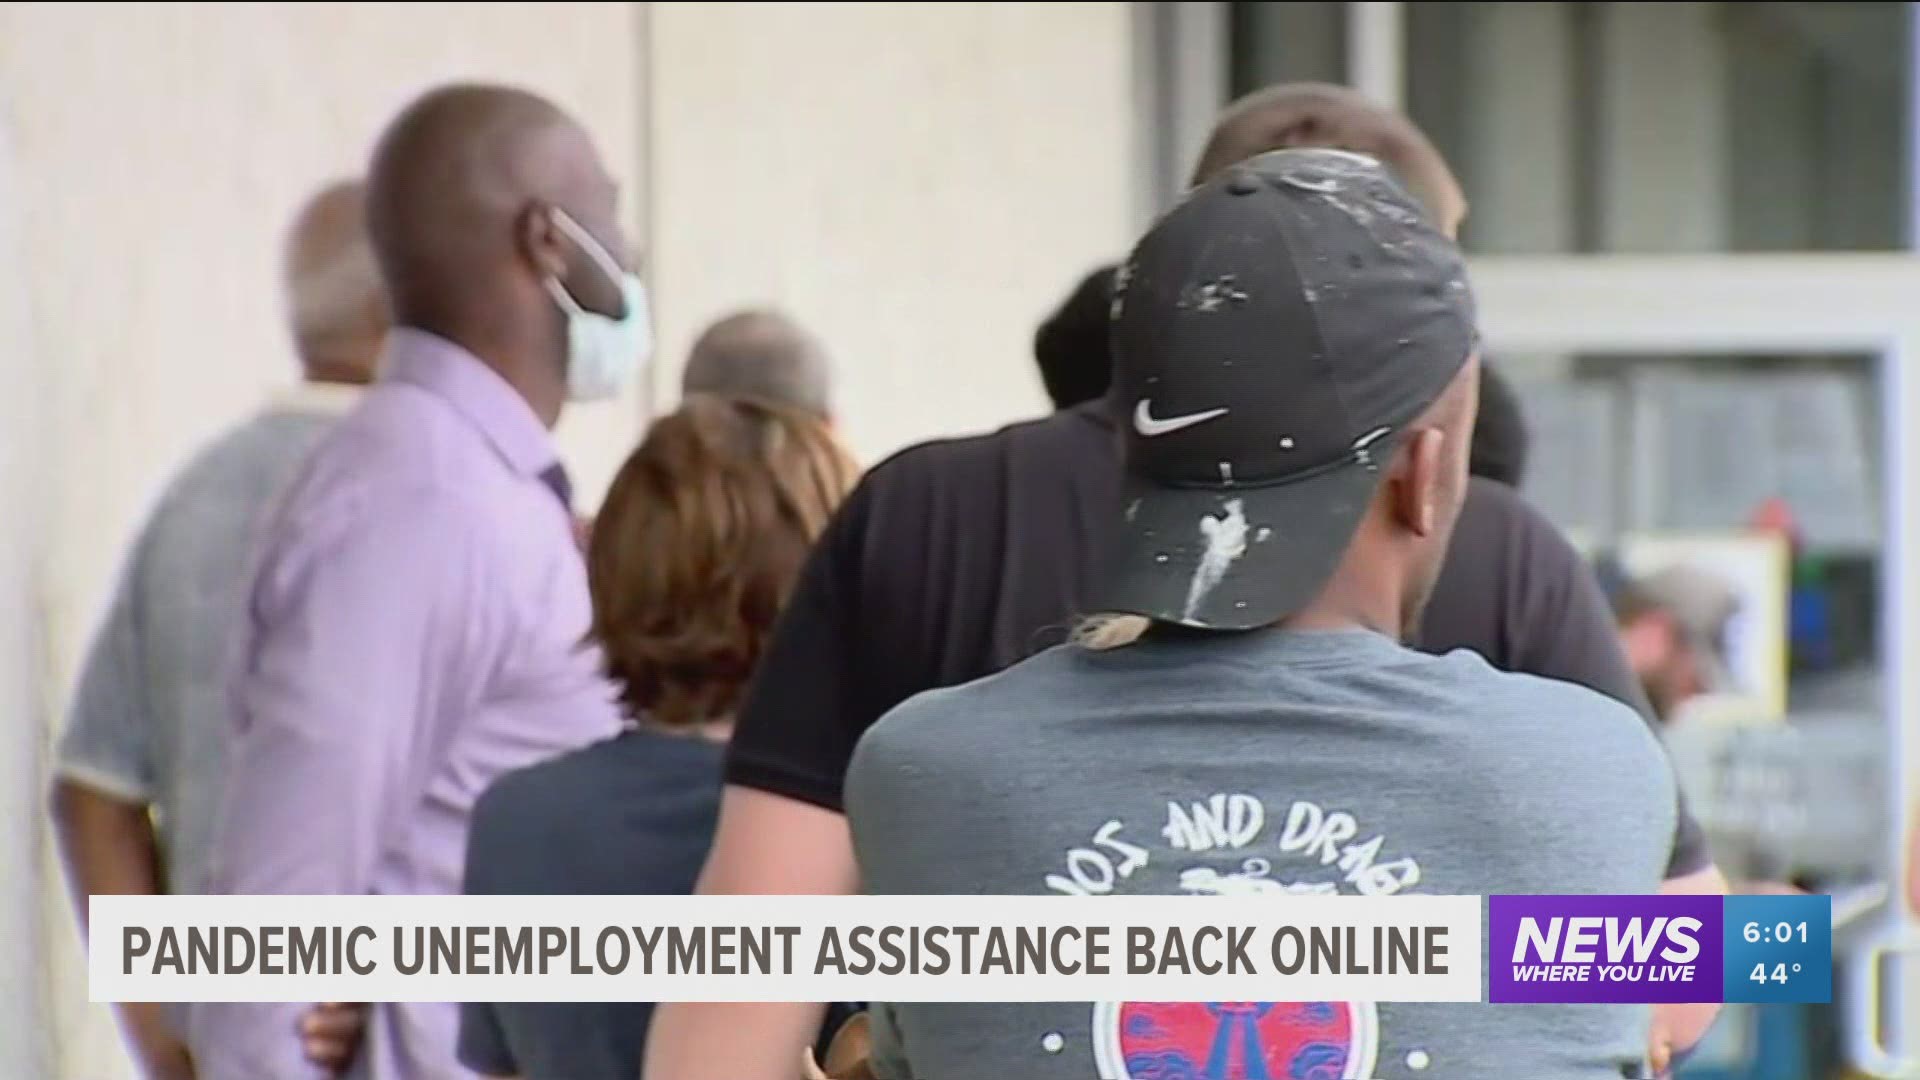 After weeks of waiting, Arkansas’ pandemic unemployment system is back up and running one week earlier than expected. https://bit.ly/3tk8h4T